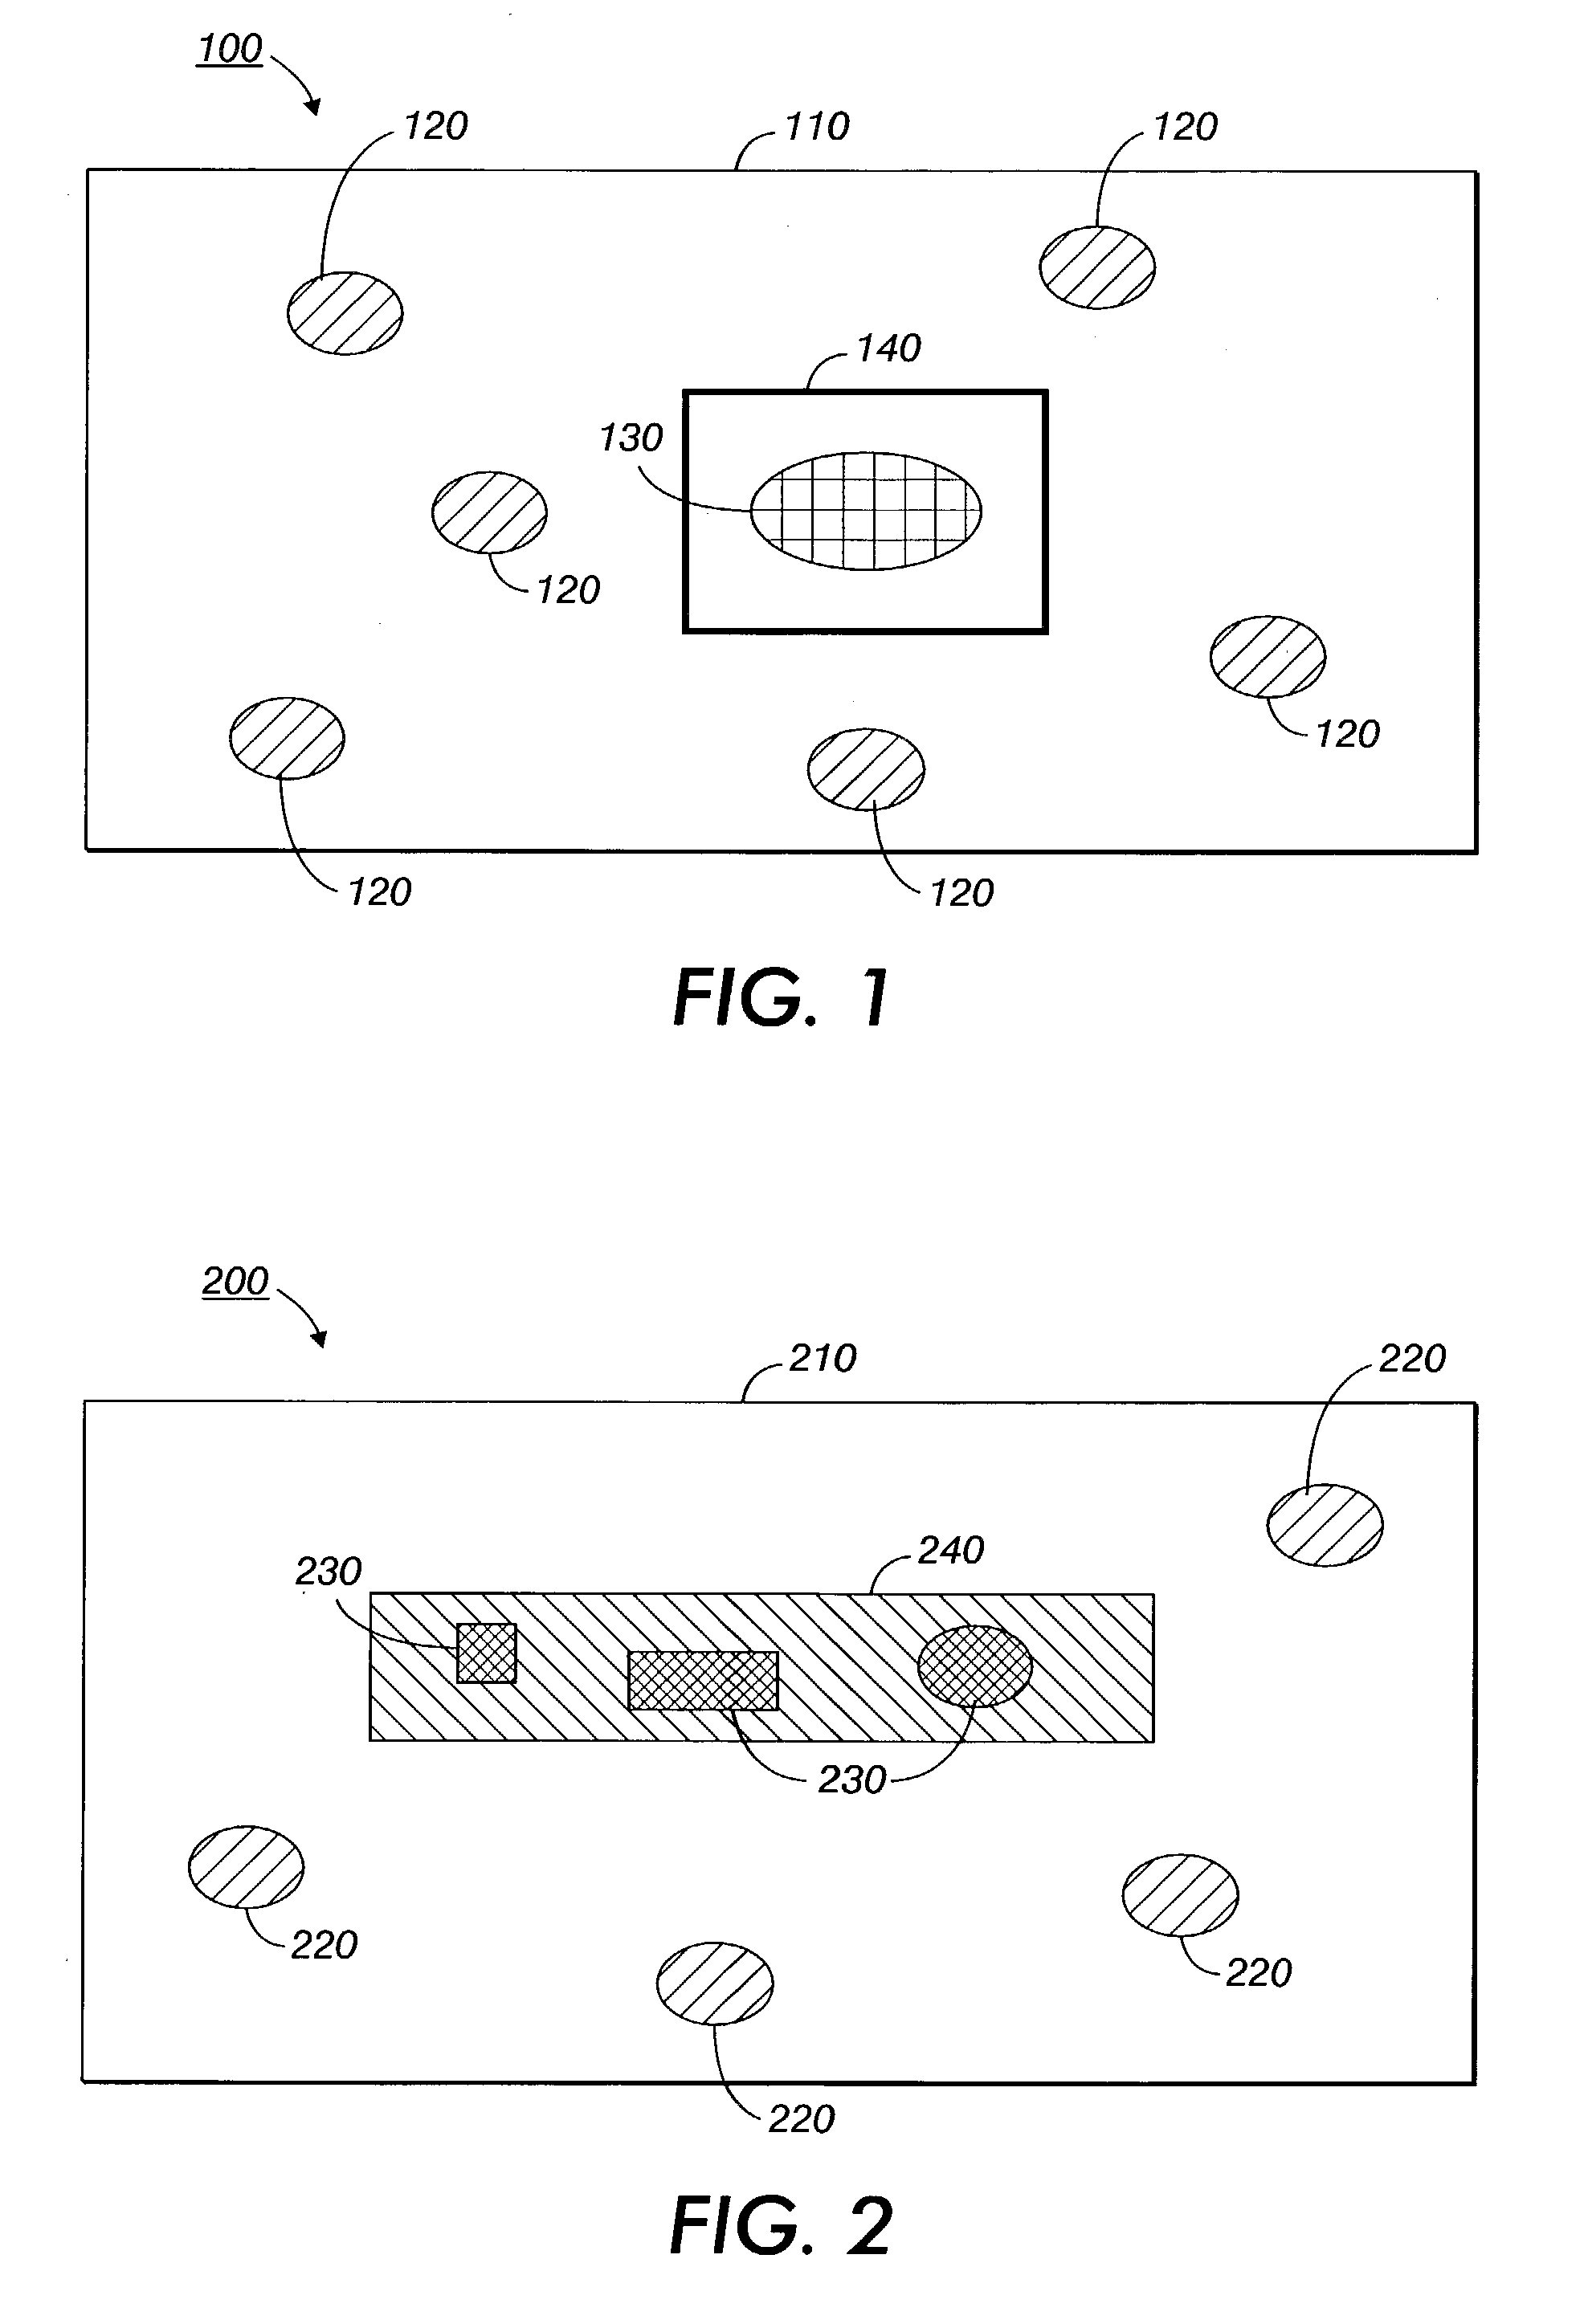 Systems and method for automatically choosing visual characteristics to highlight a target against a background